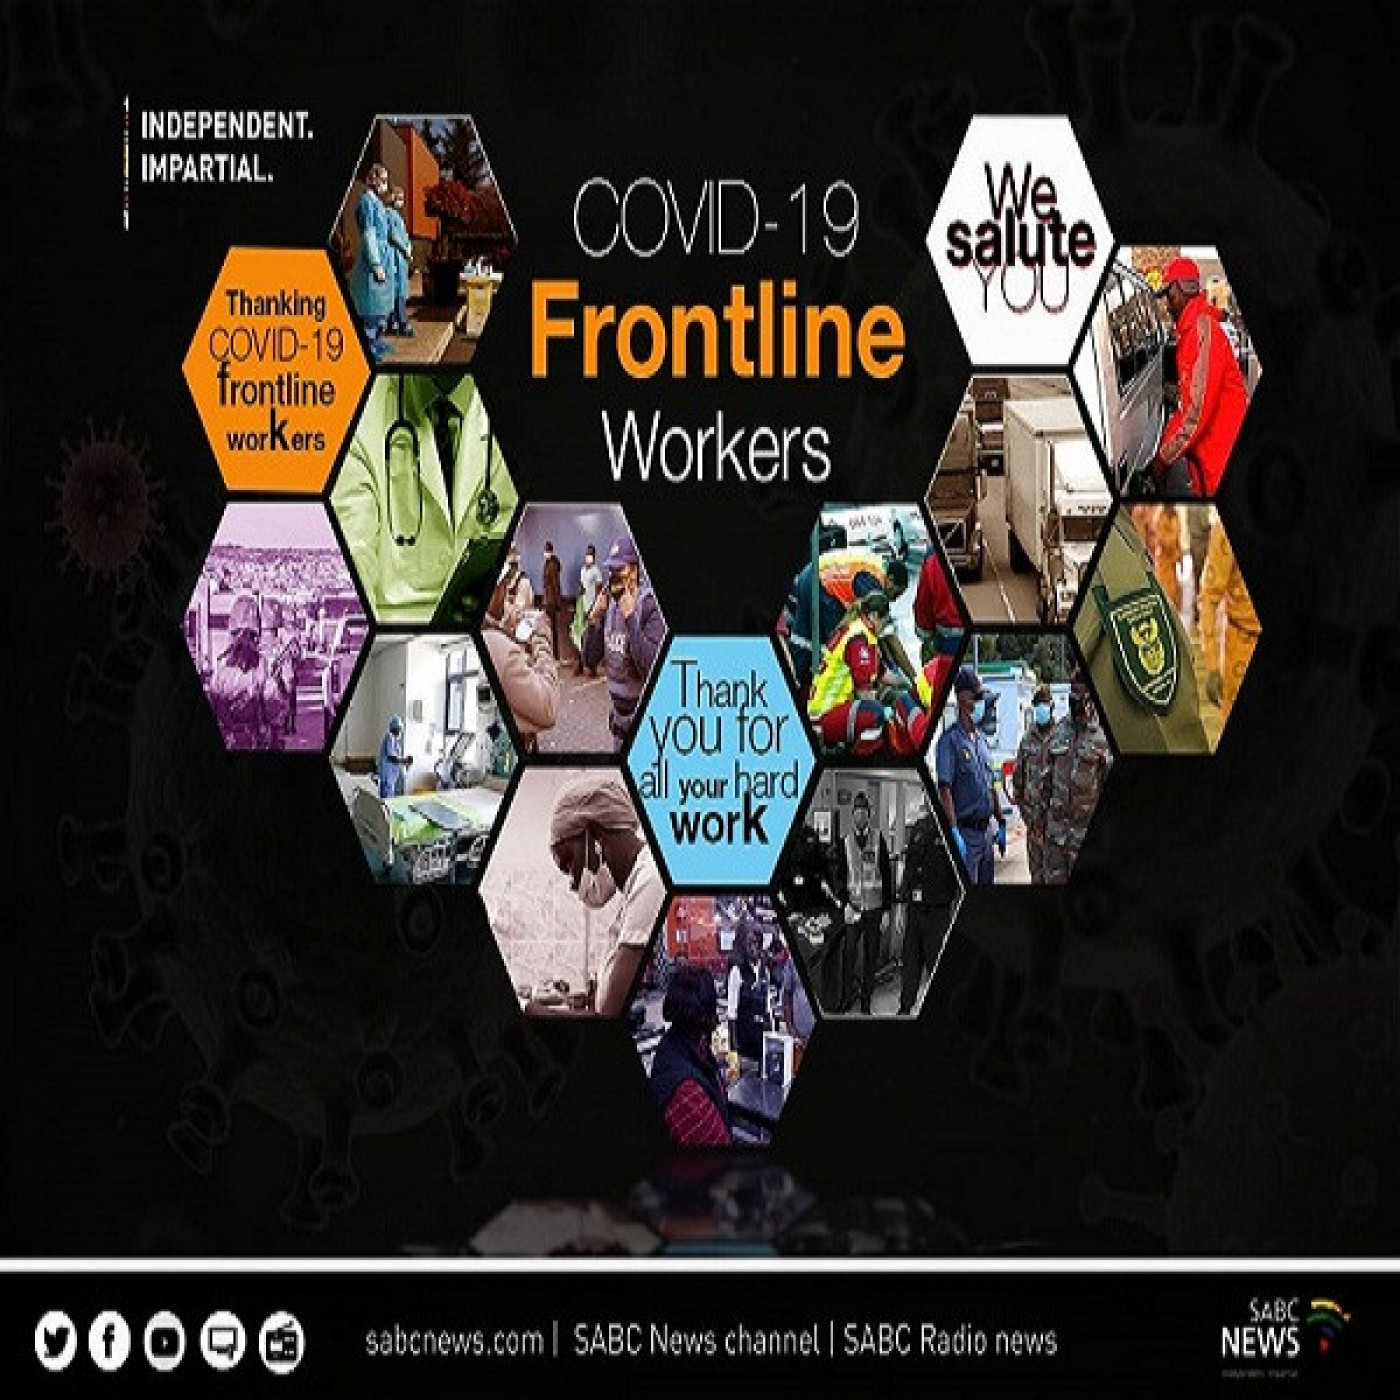 PODCAST-COVID-19 Frontline Workers Part XIV: An IT specialist shares his story